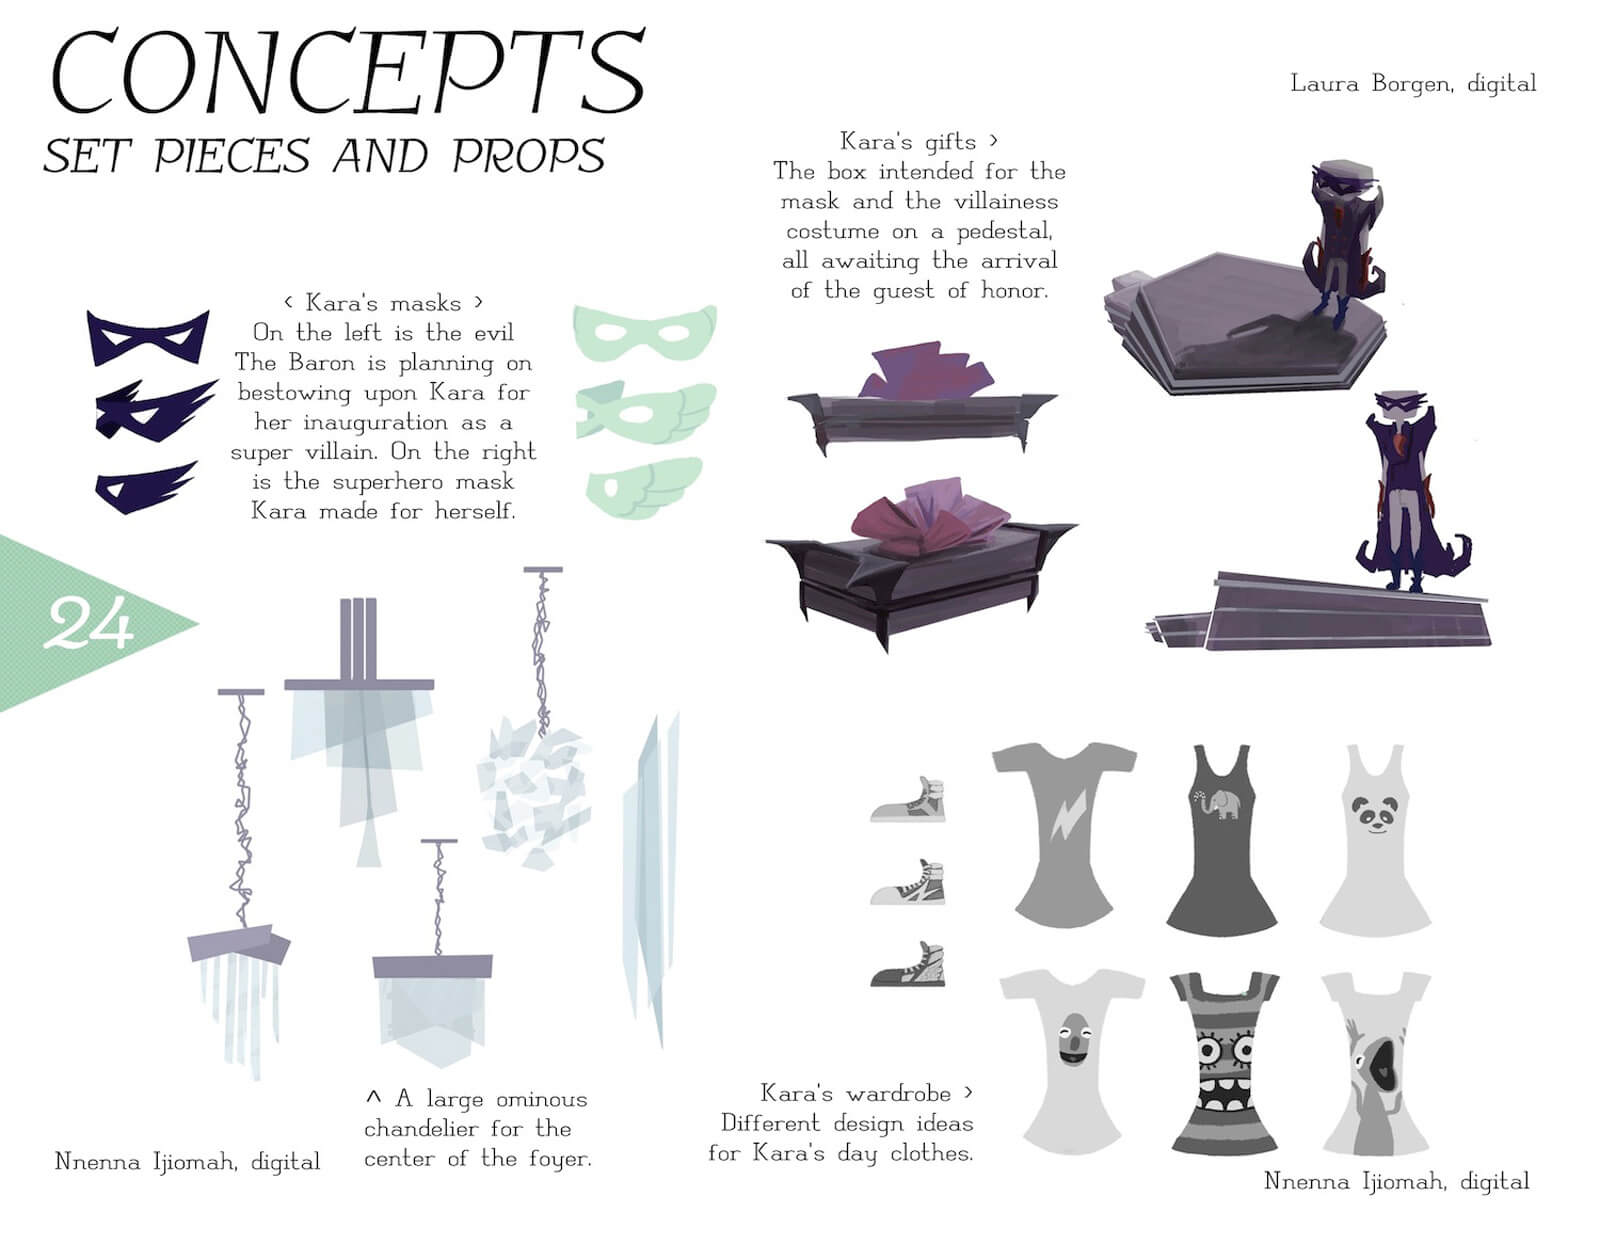 Concept art of props in the film Super Secret including face masks, gift boxes, costumes, and chandeliers